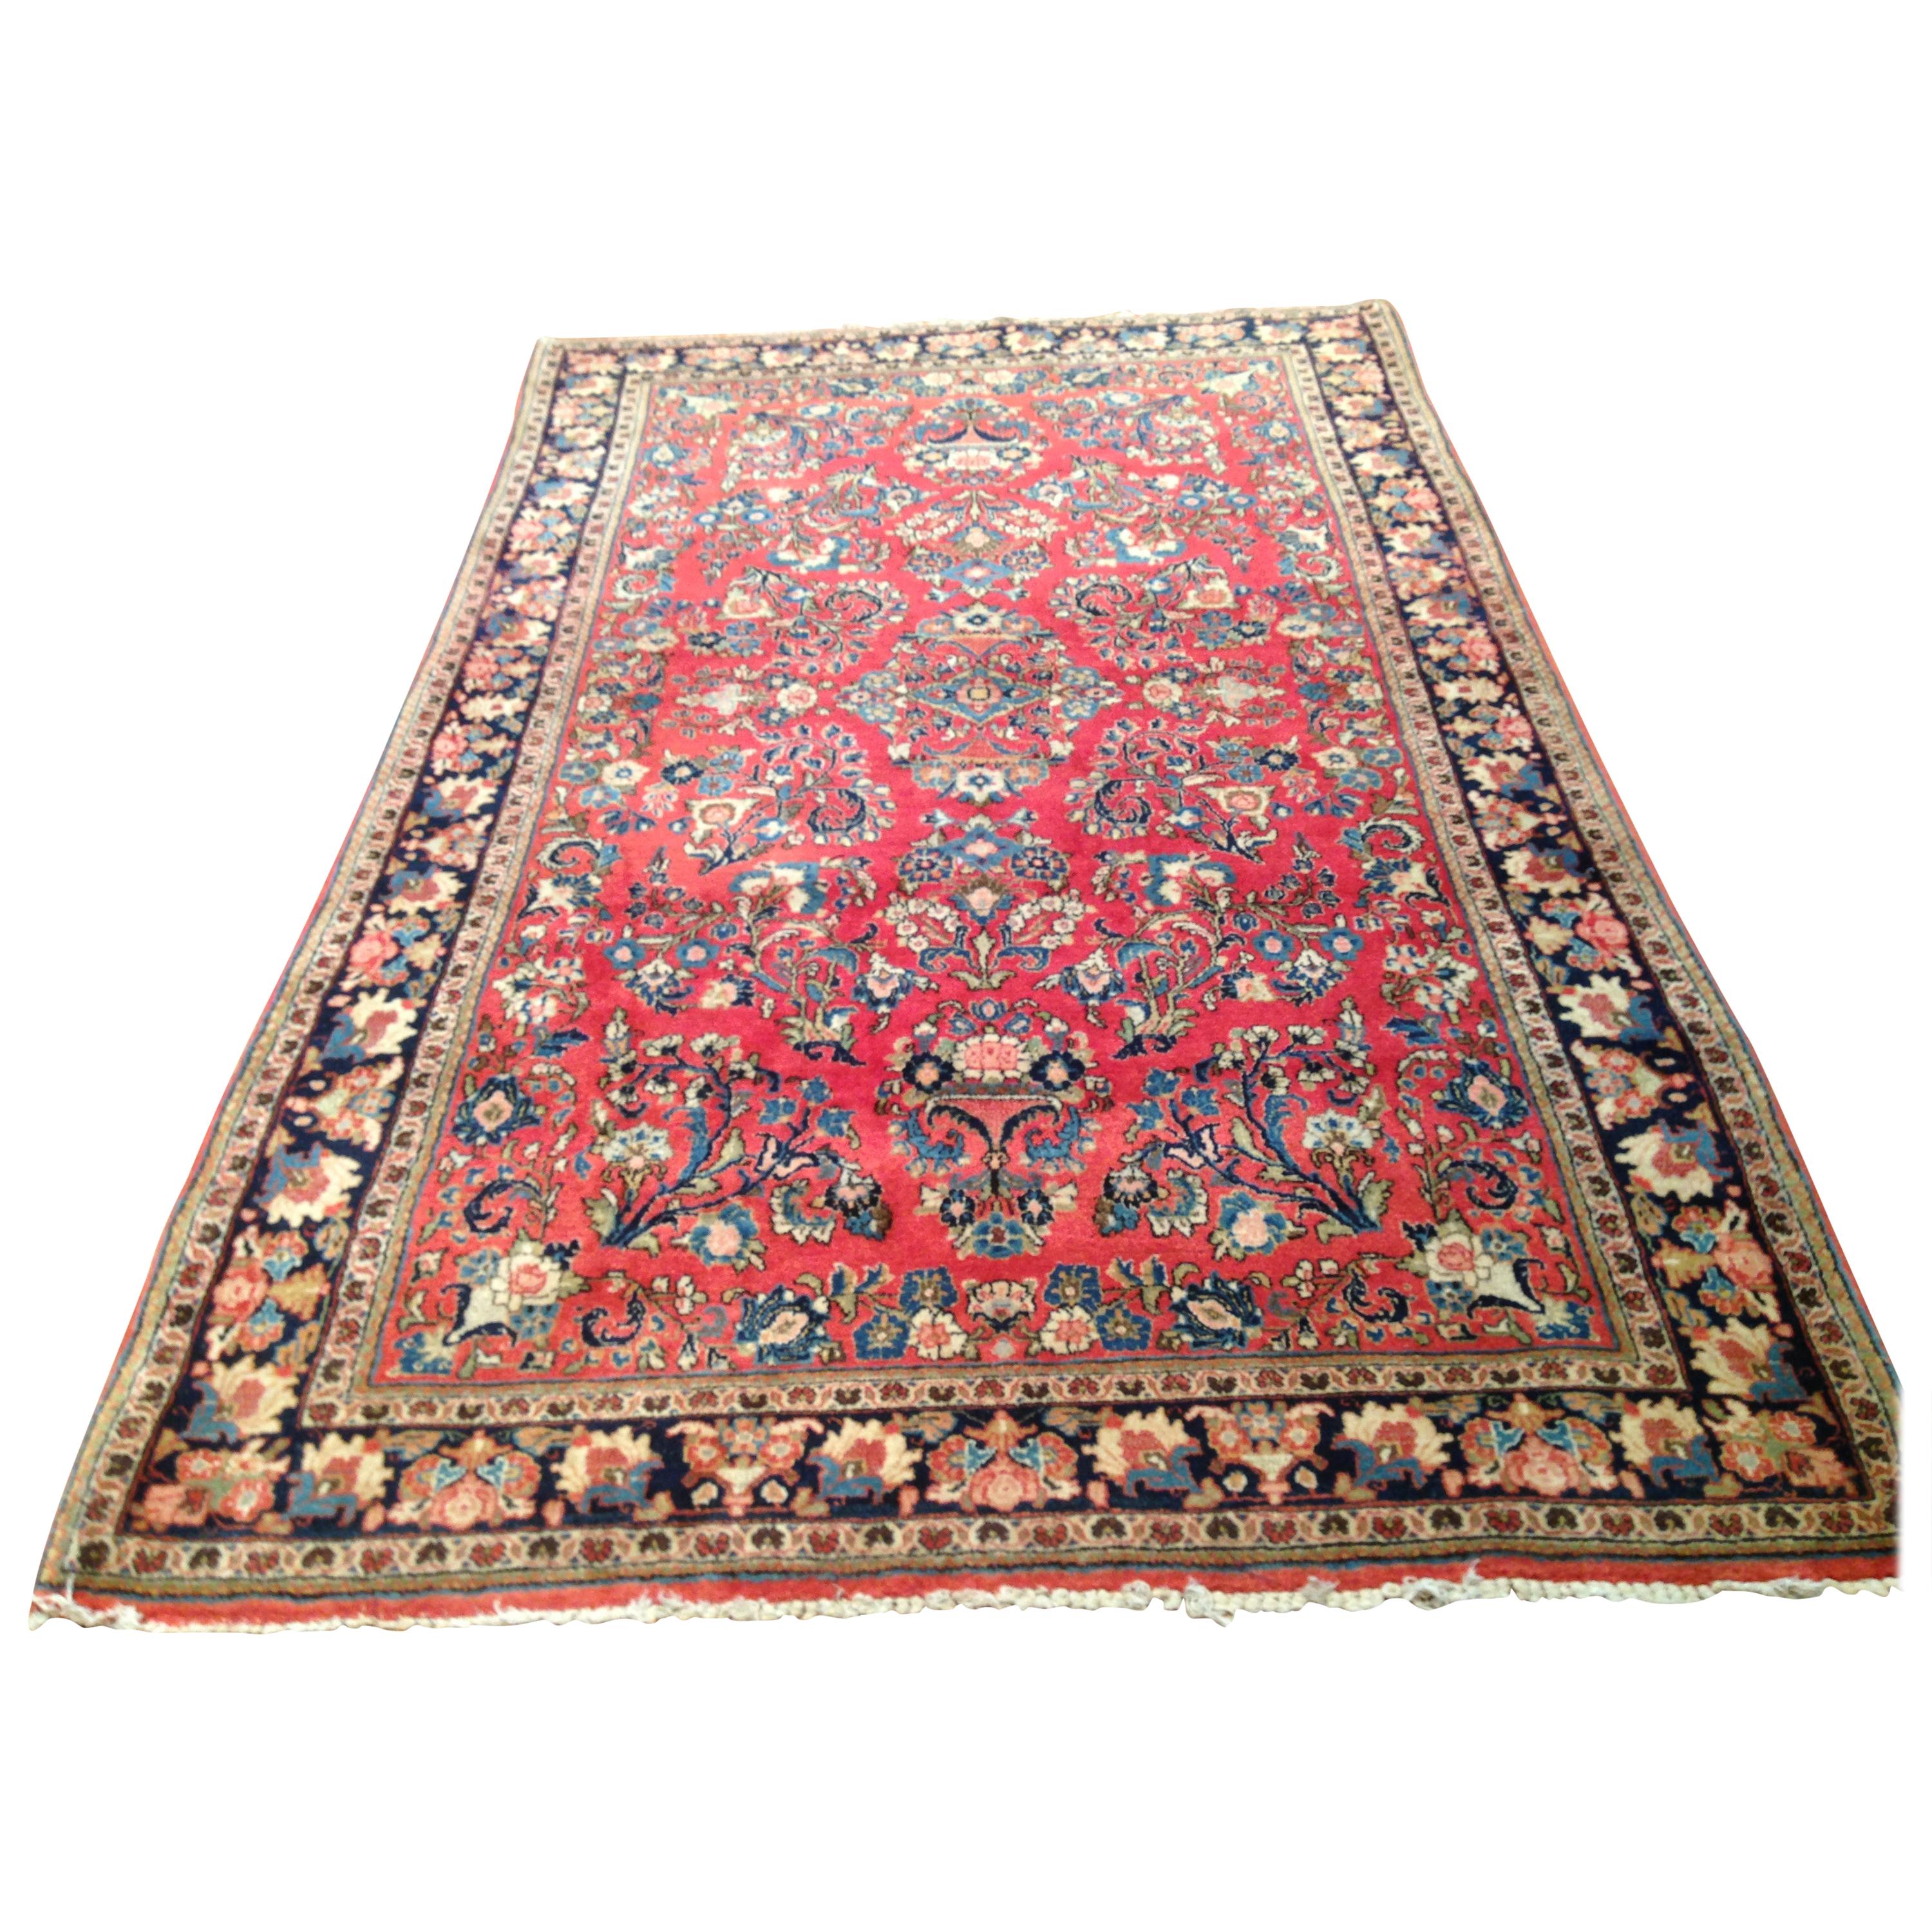 Antique Red Gold Floral Persian Sarouk Small Area Rug, circa 1930s For Sale